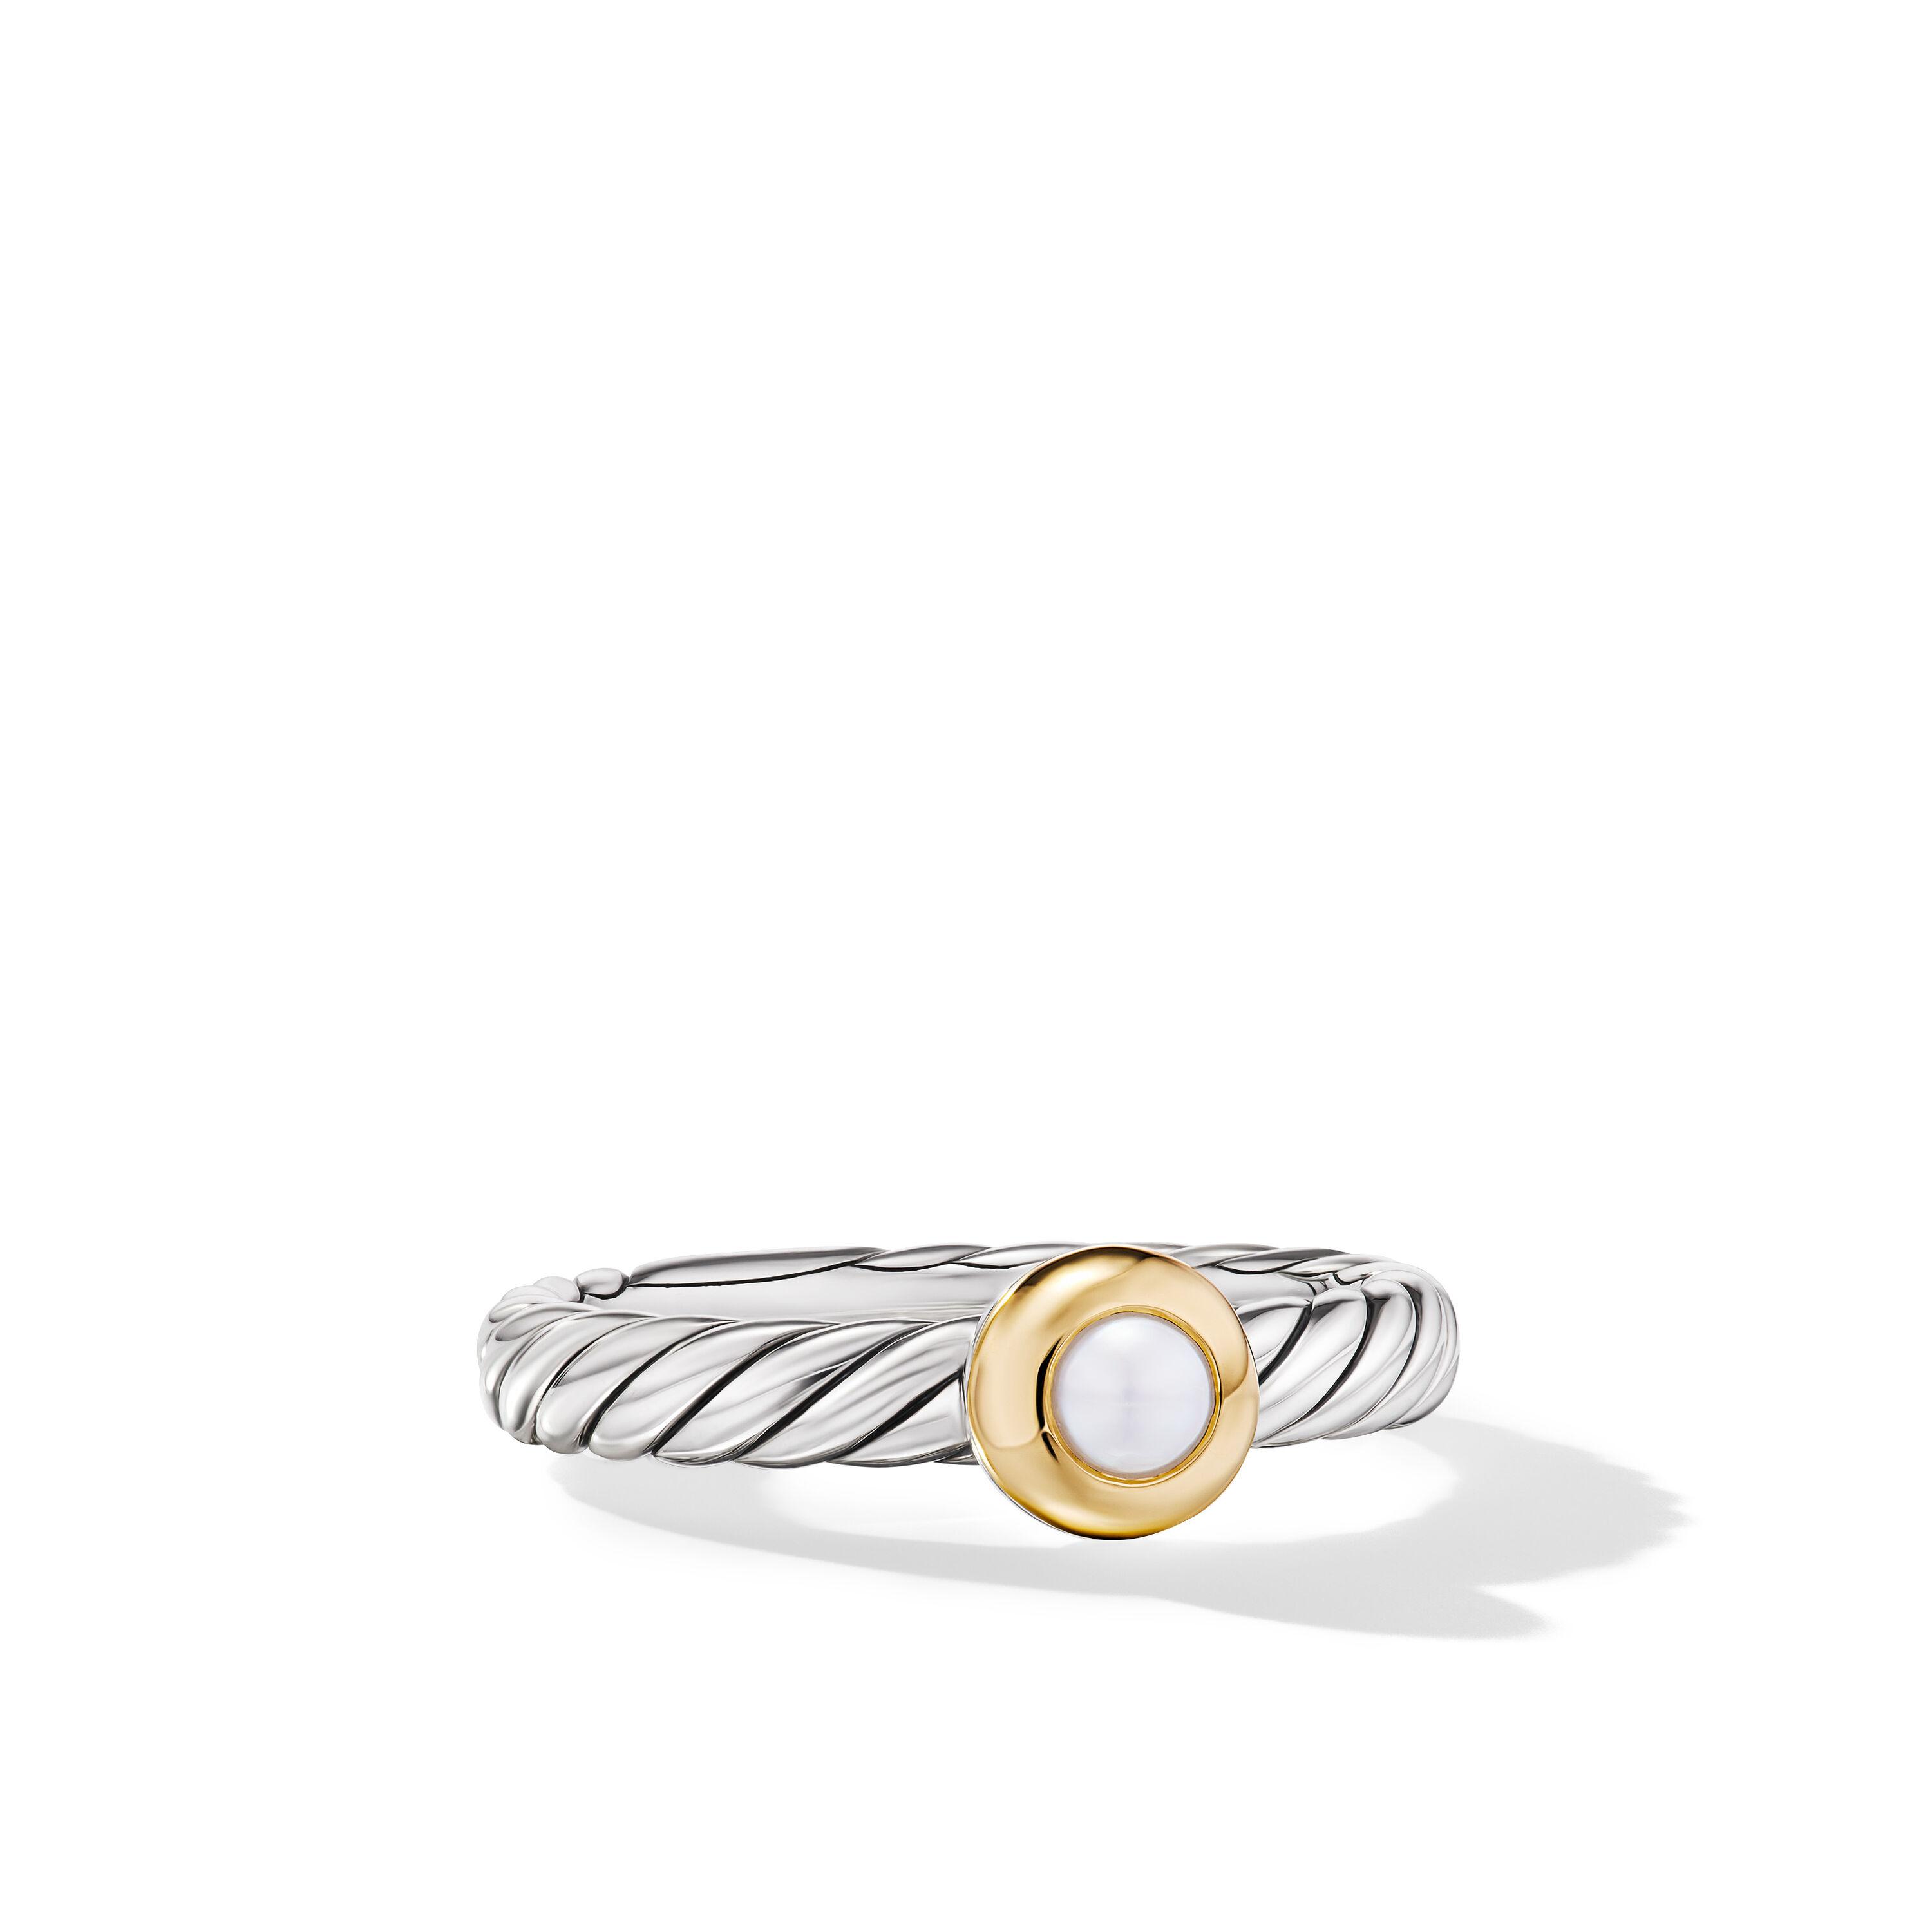 David Yurman Petite Cable Ring in Sterling Silver with 14K Yellow Gold and Pearl, Size 6